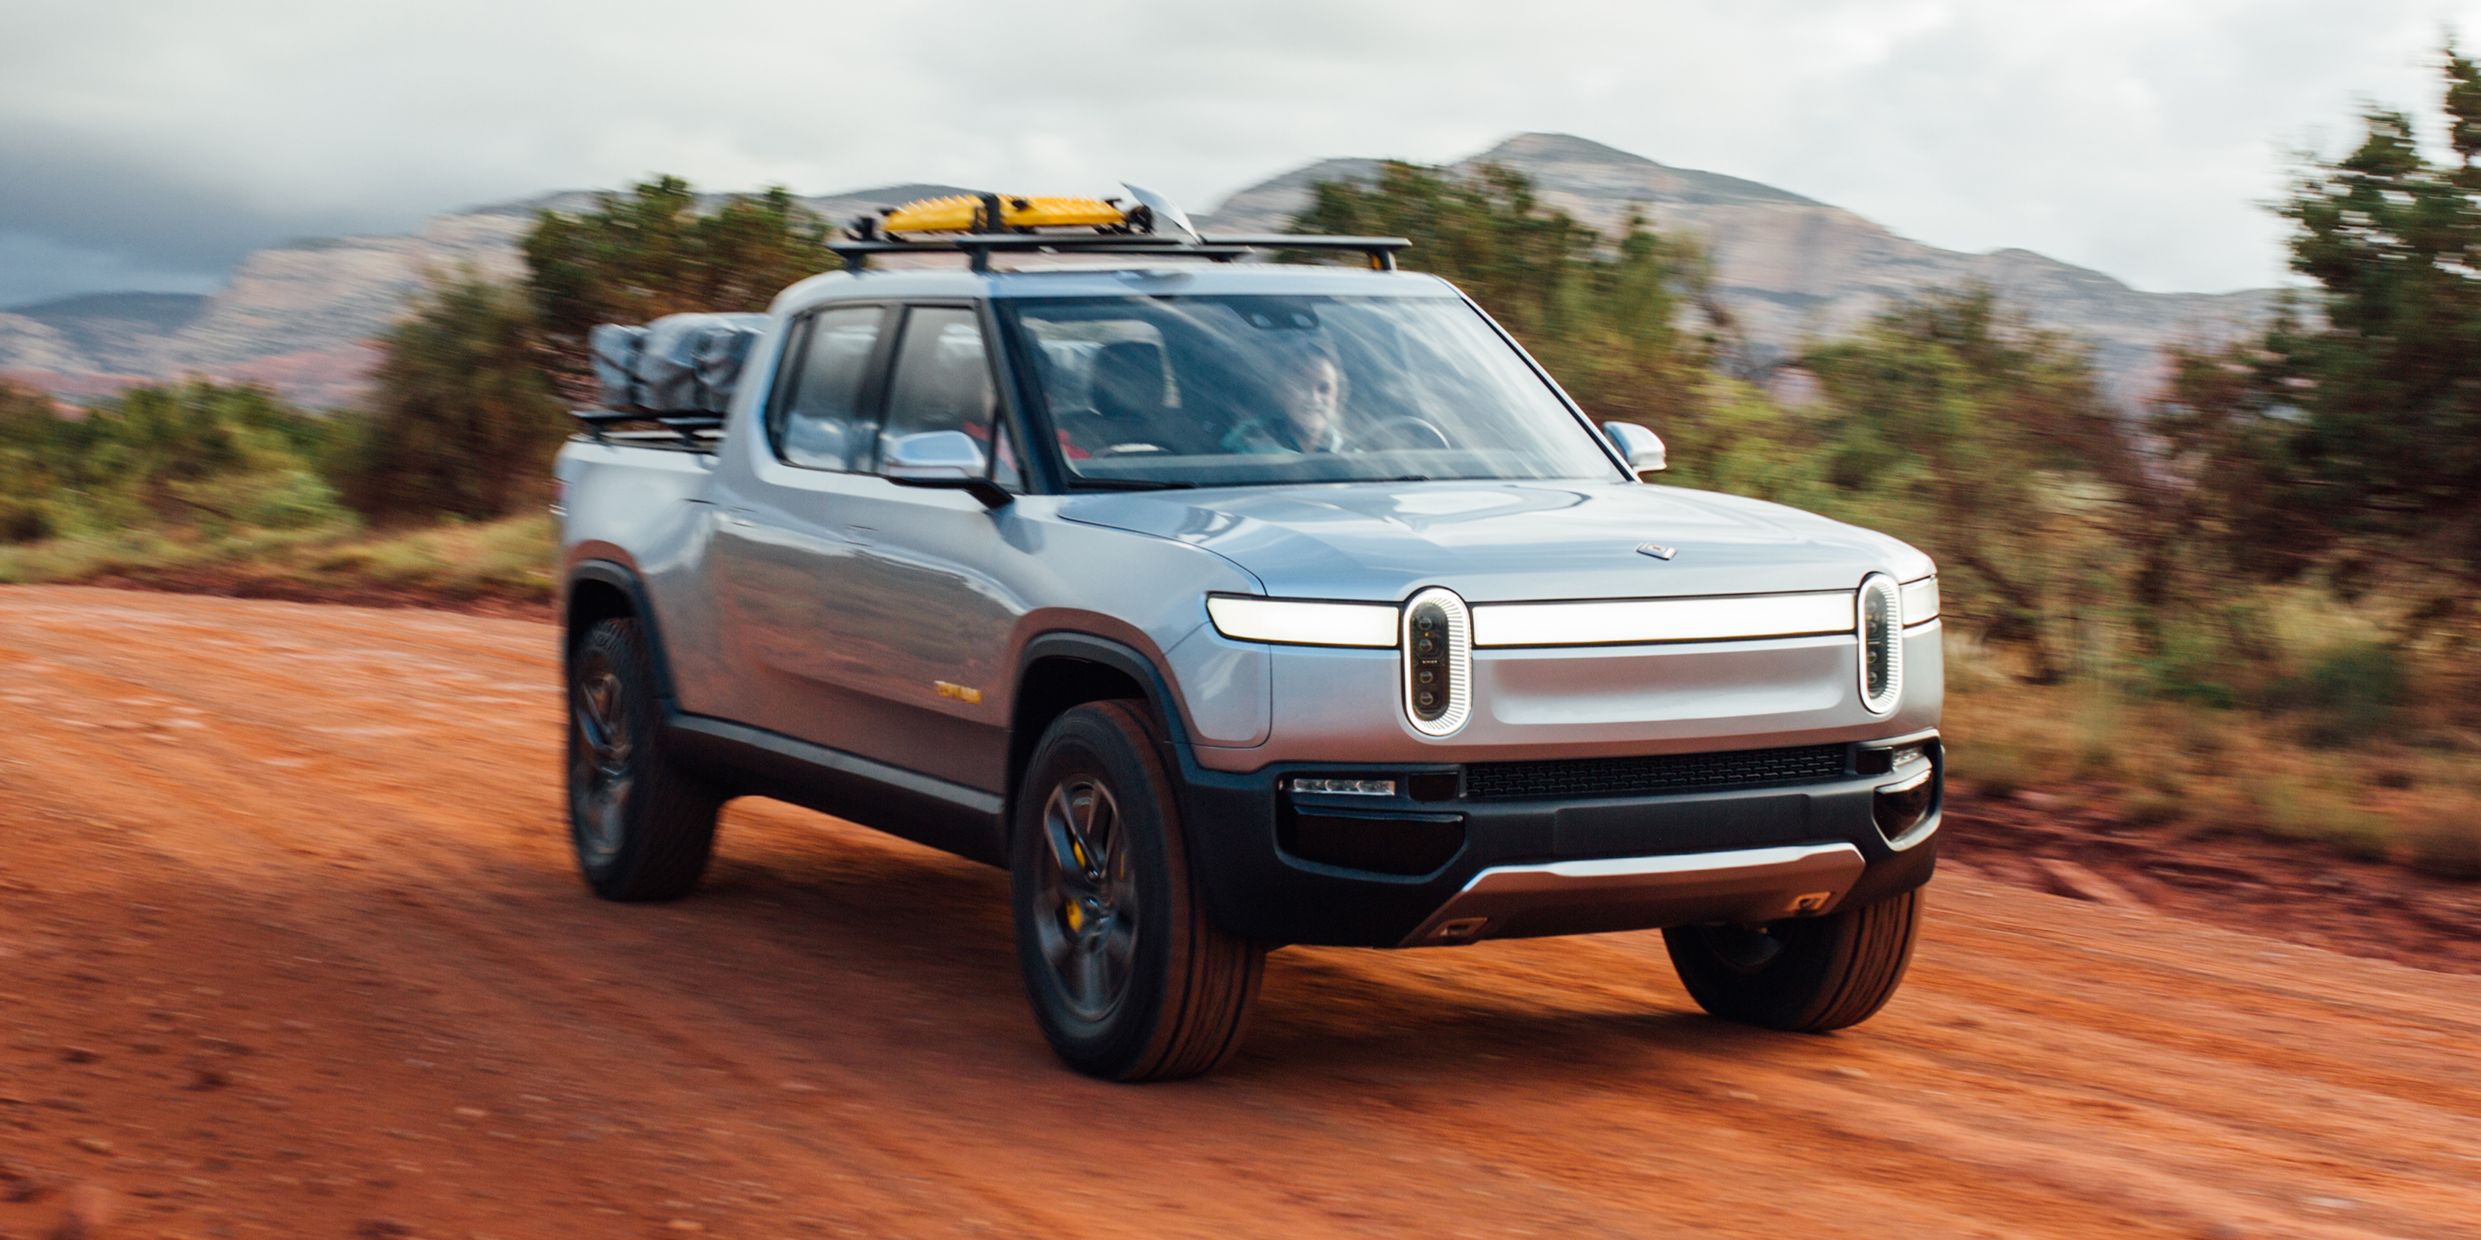 A Rivian R1T Will Race at This Year's Pikes Peak Hill Climb